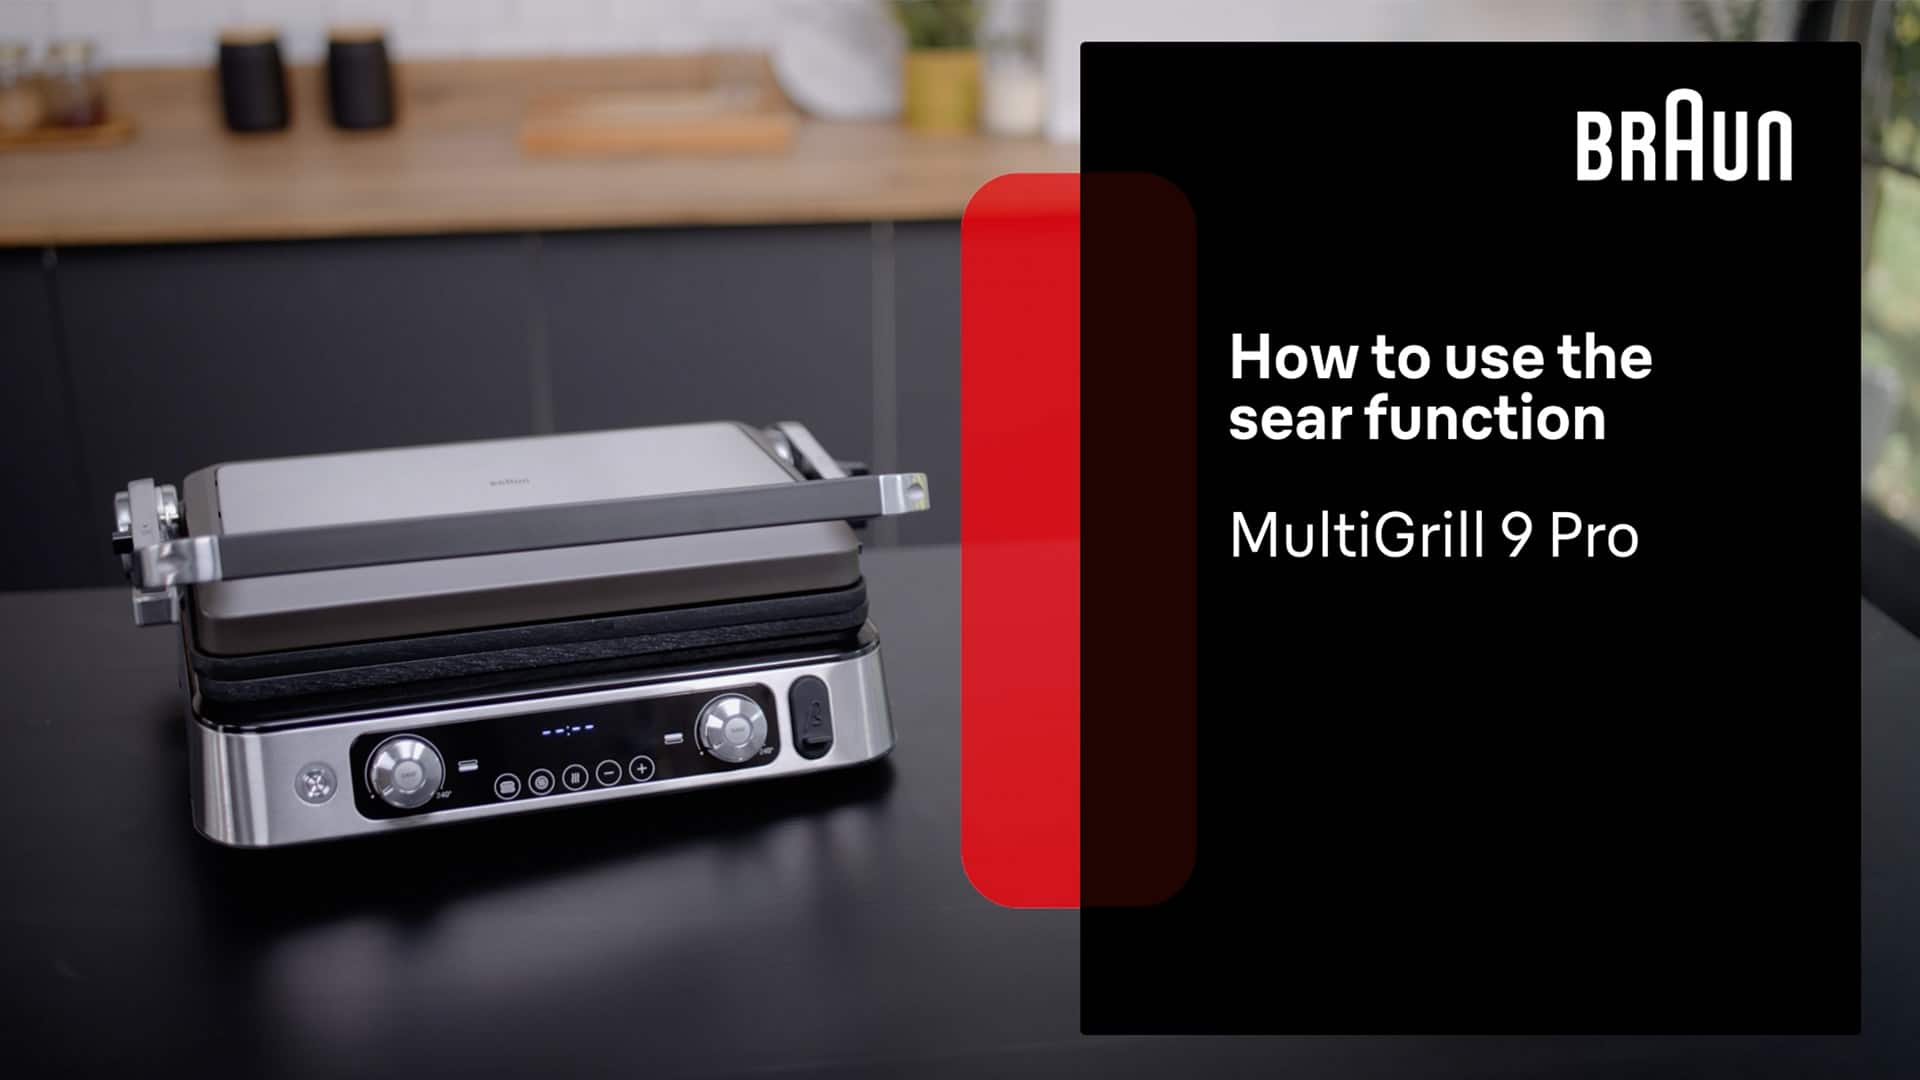 Braun MultiGrill 9 Pro | How to Use the Sear Function